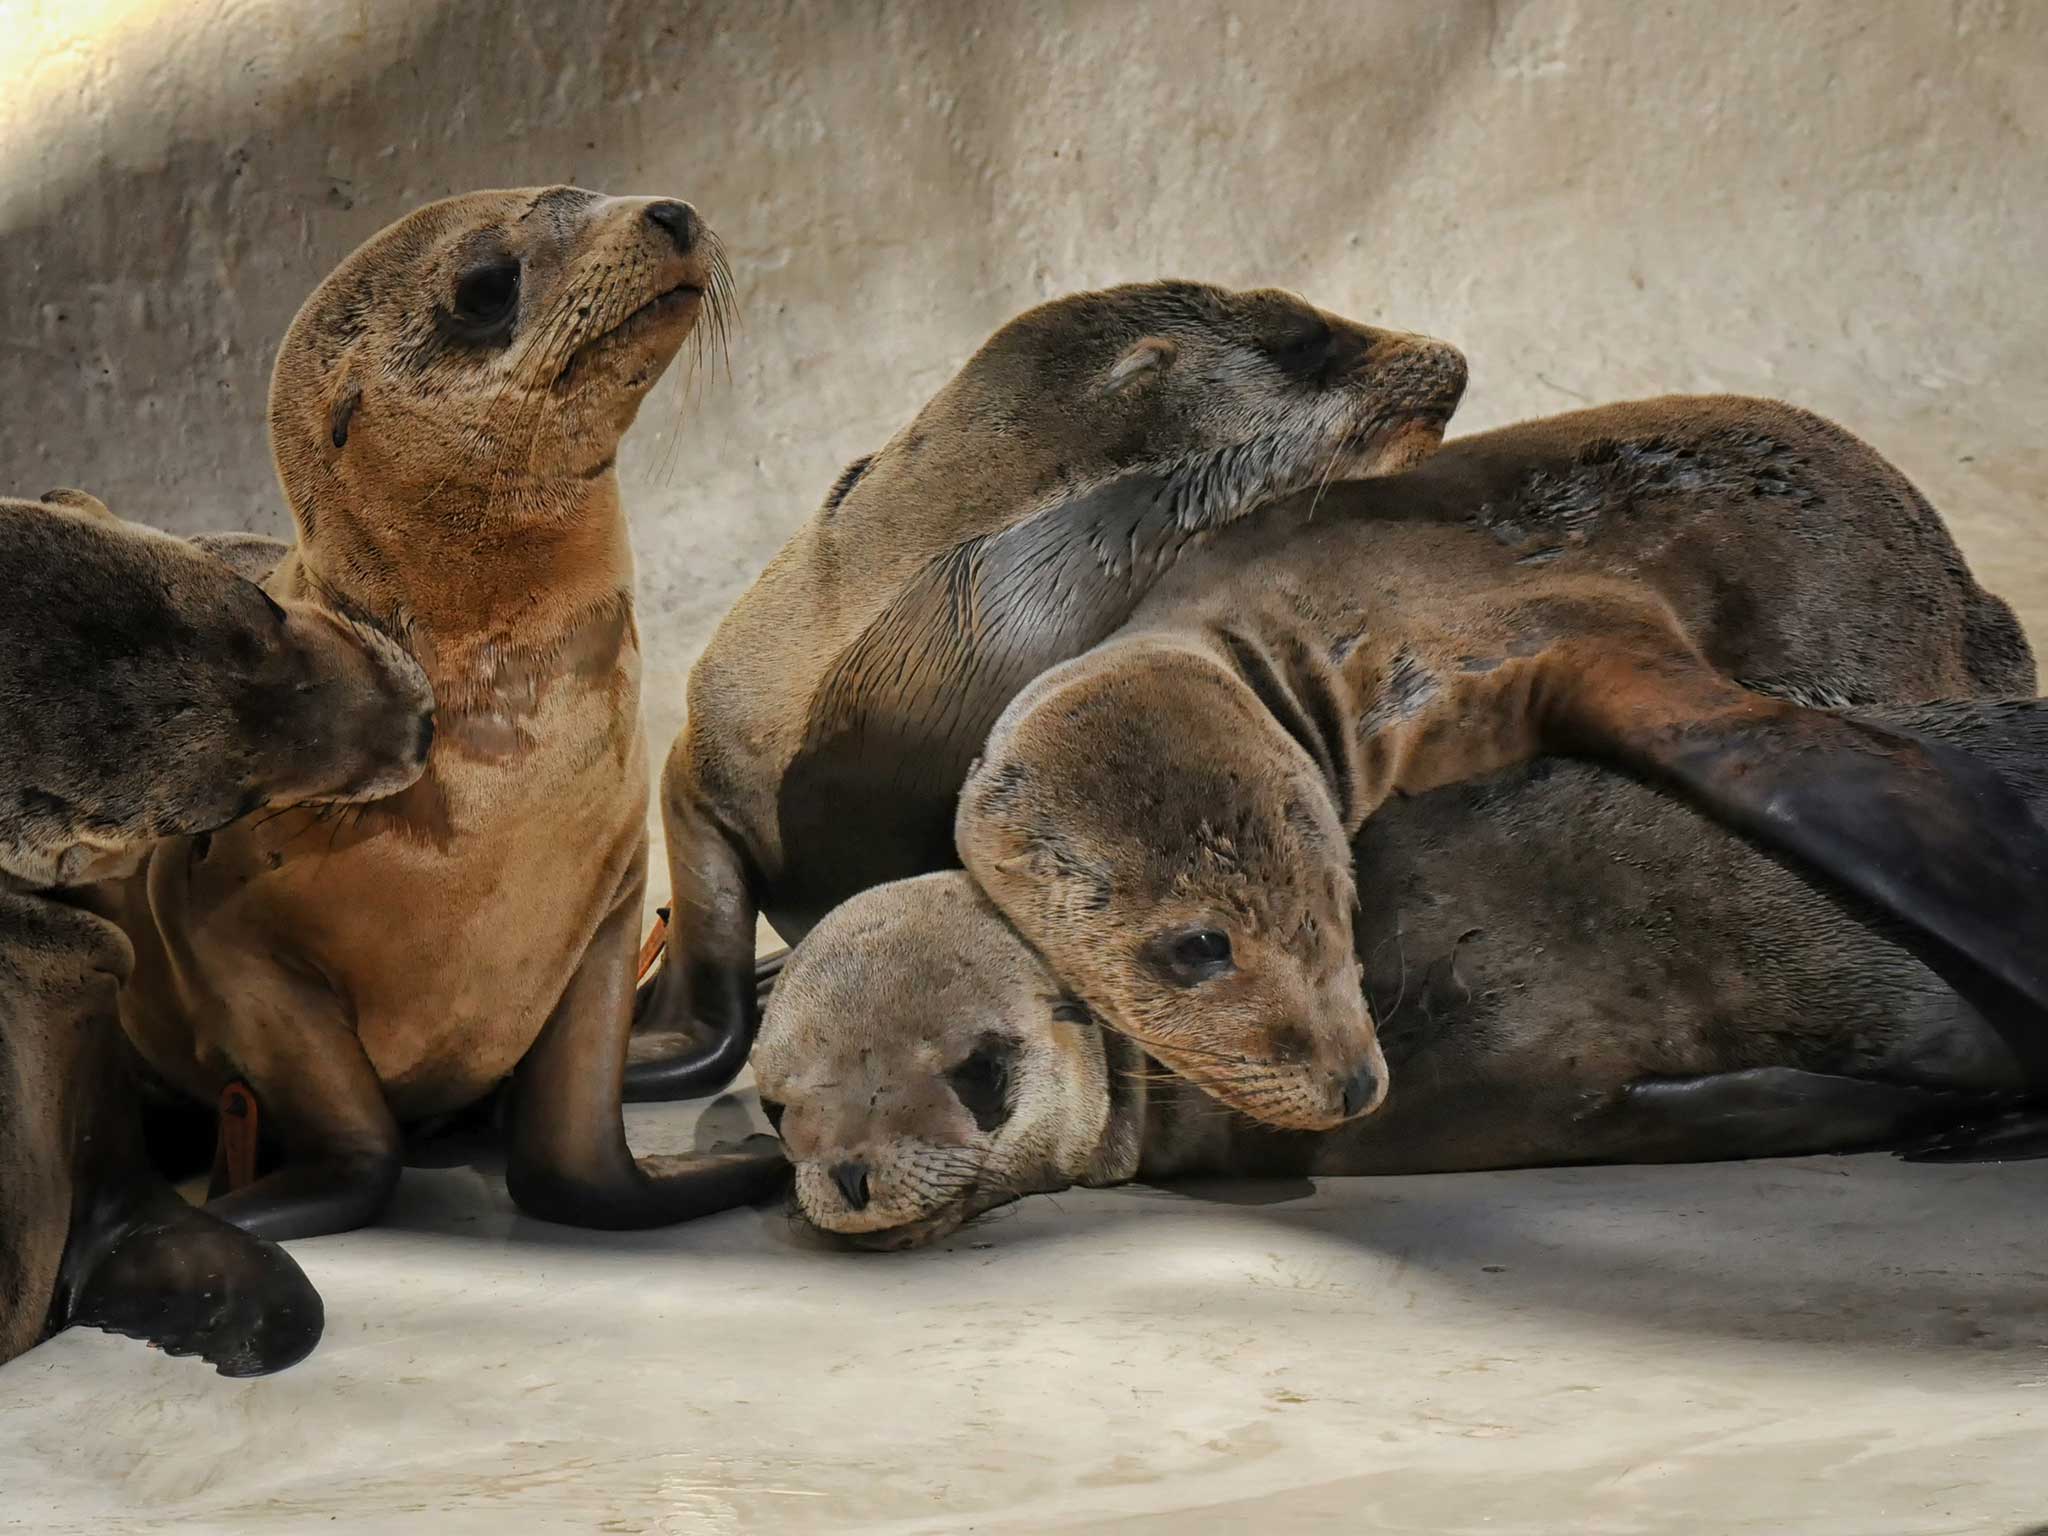 The Sea Lion pups are now being cared for by volunteers